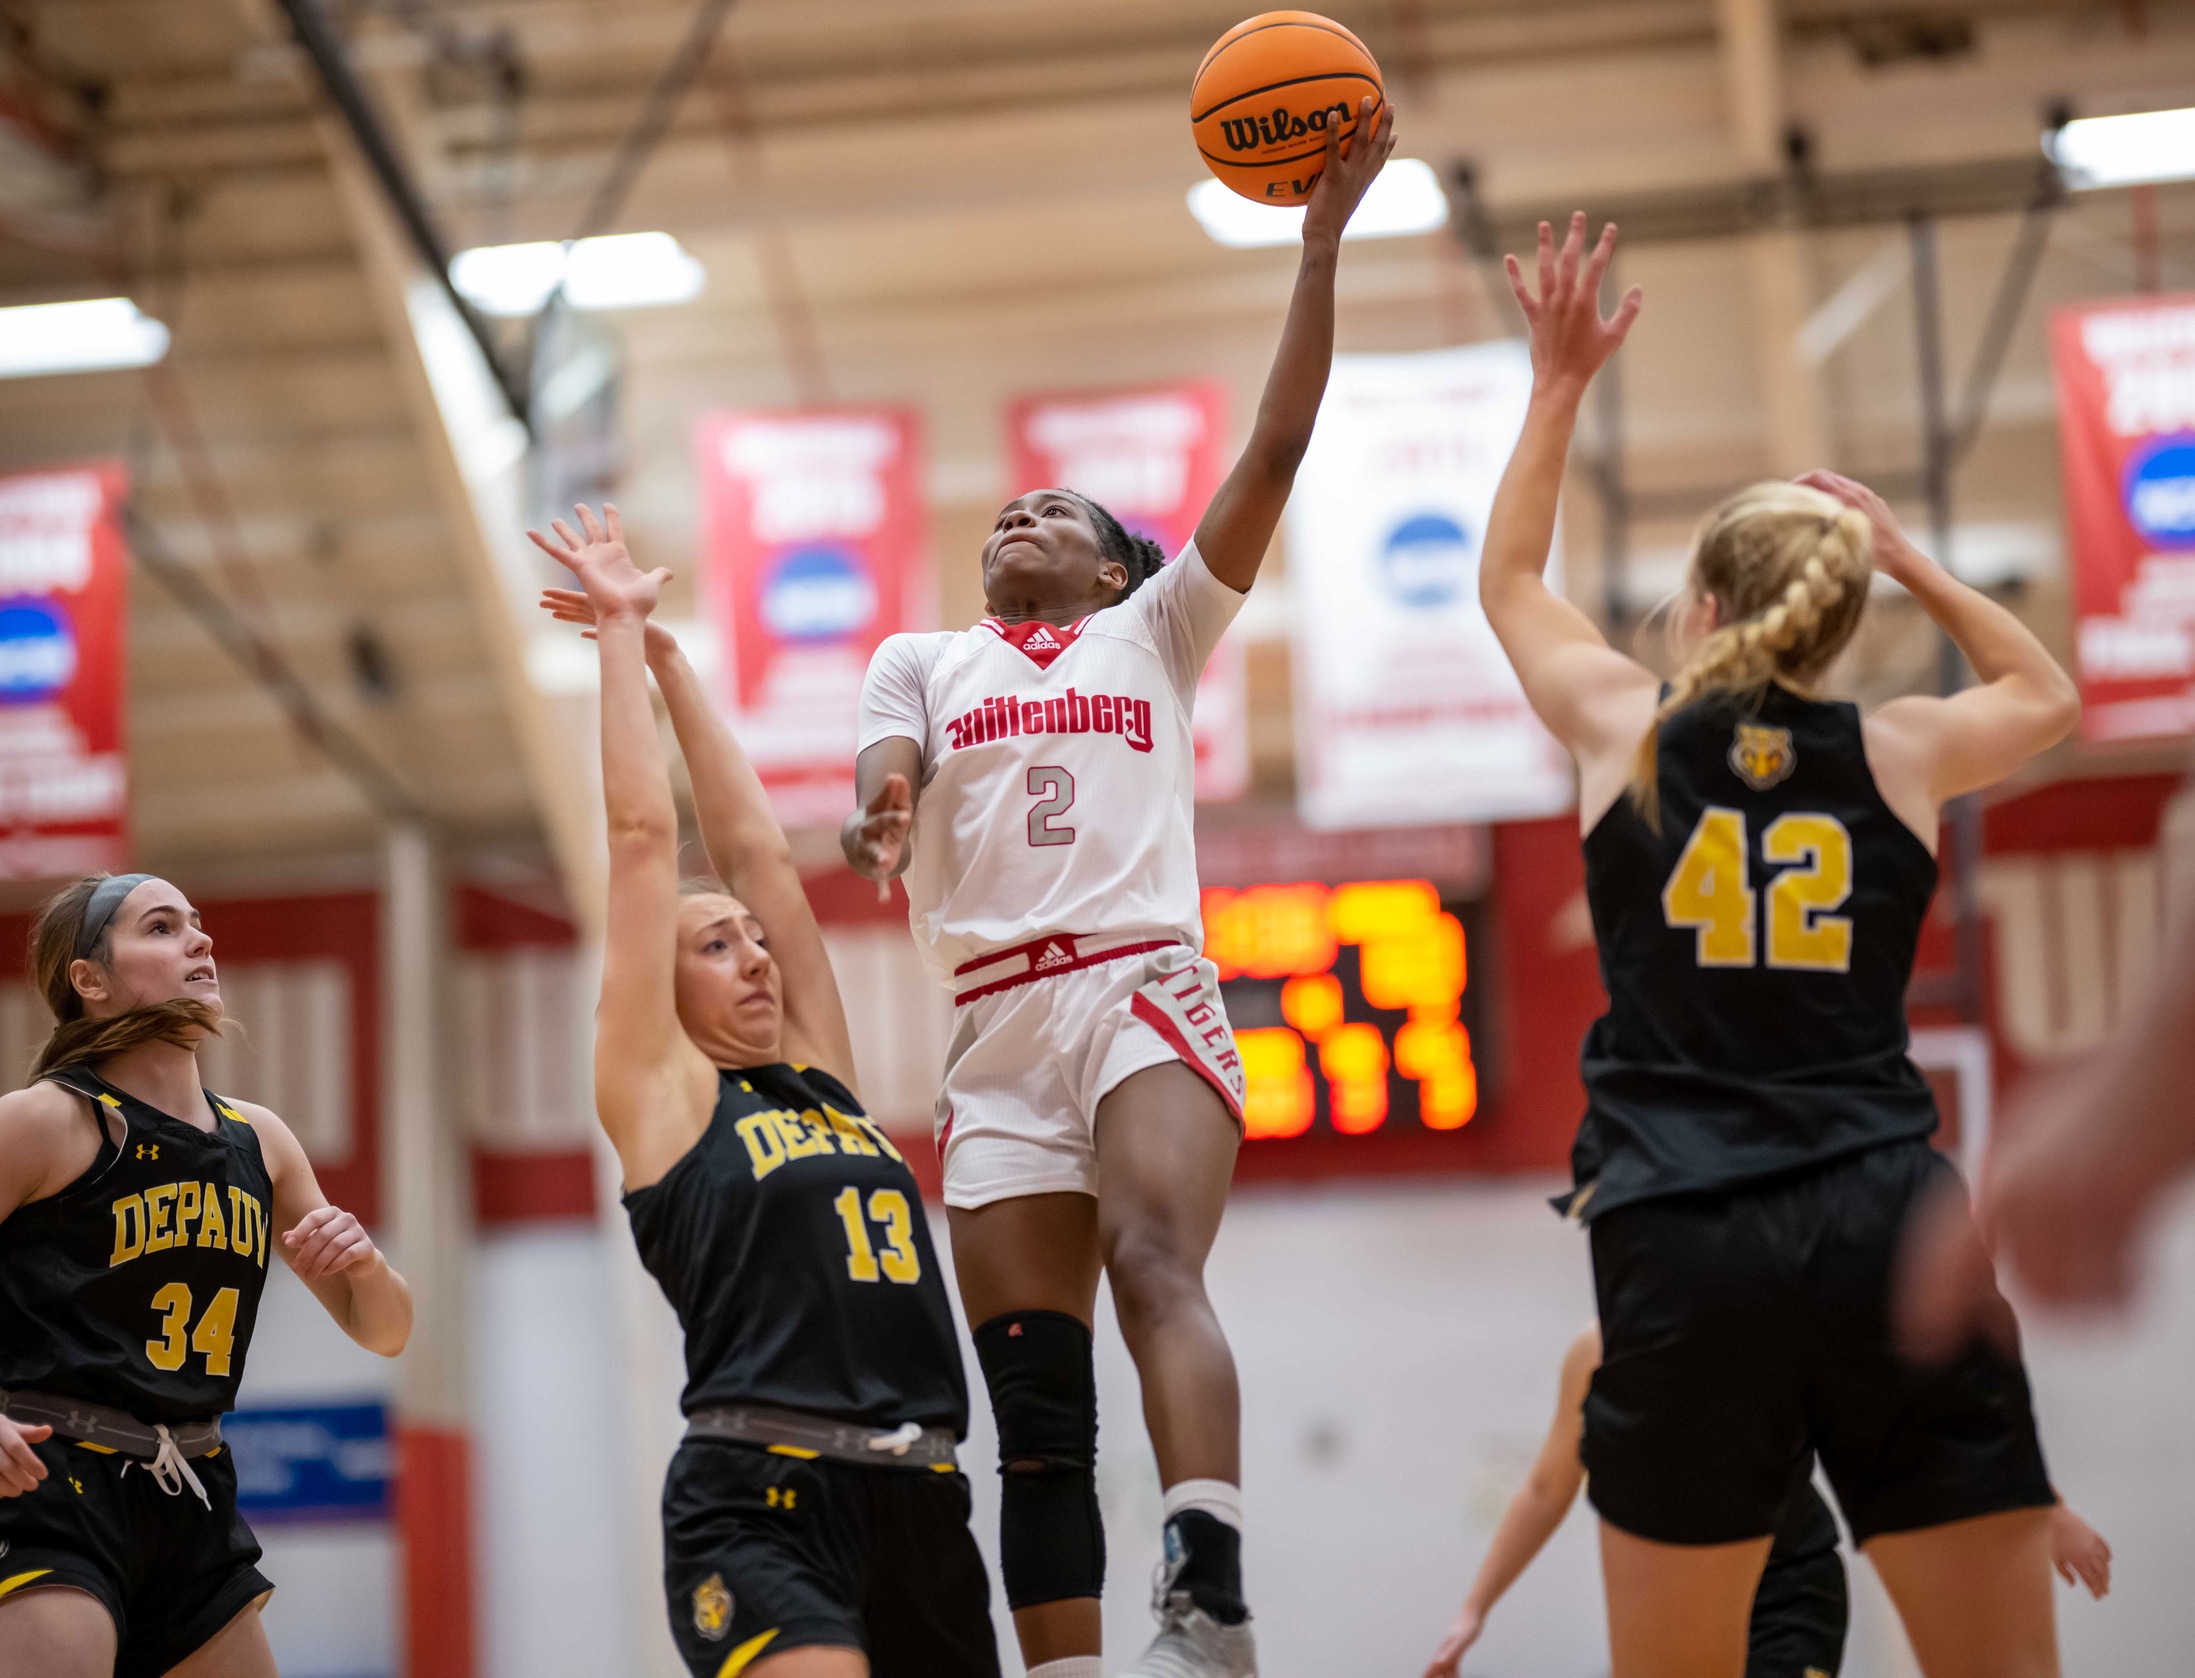 Junior Jazmyn Gaines-Burnes led Wittenberg with 16 points at DePauw on Wednesday night.